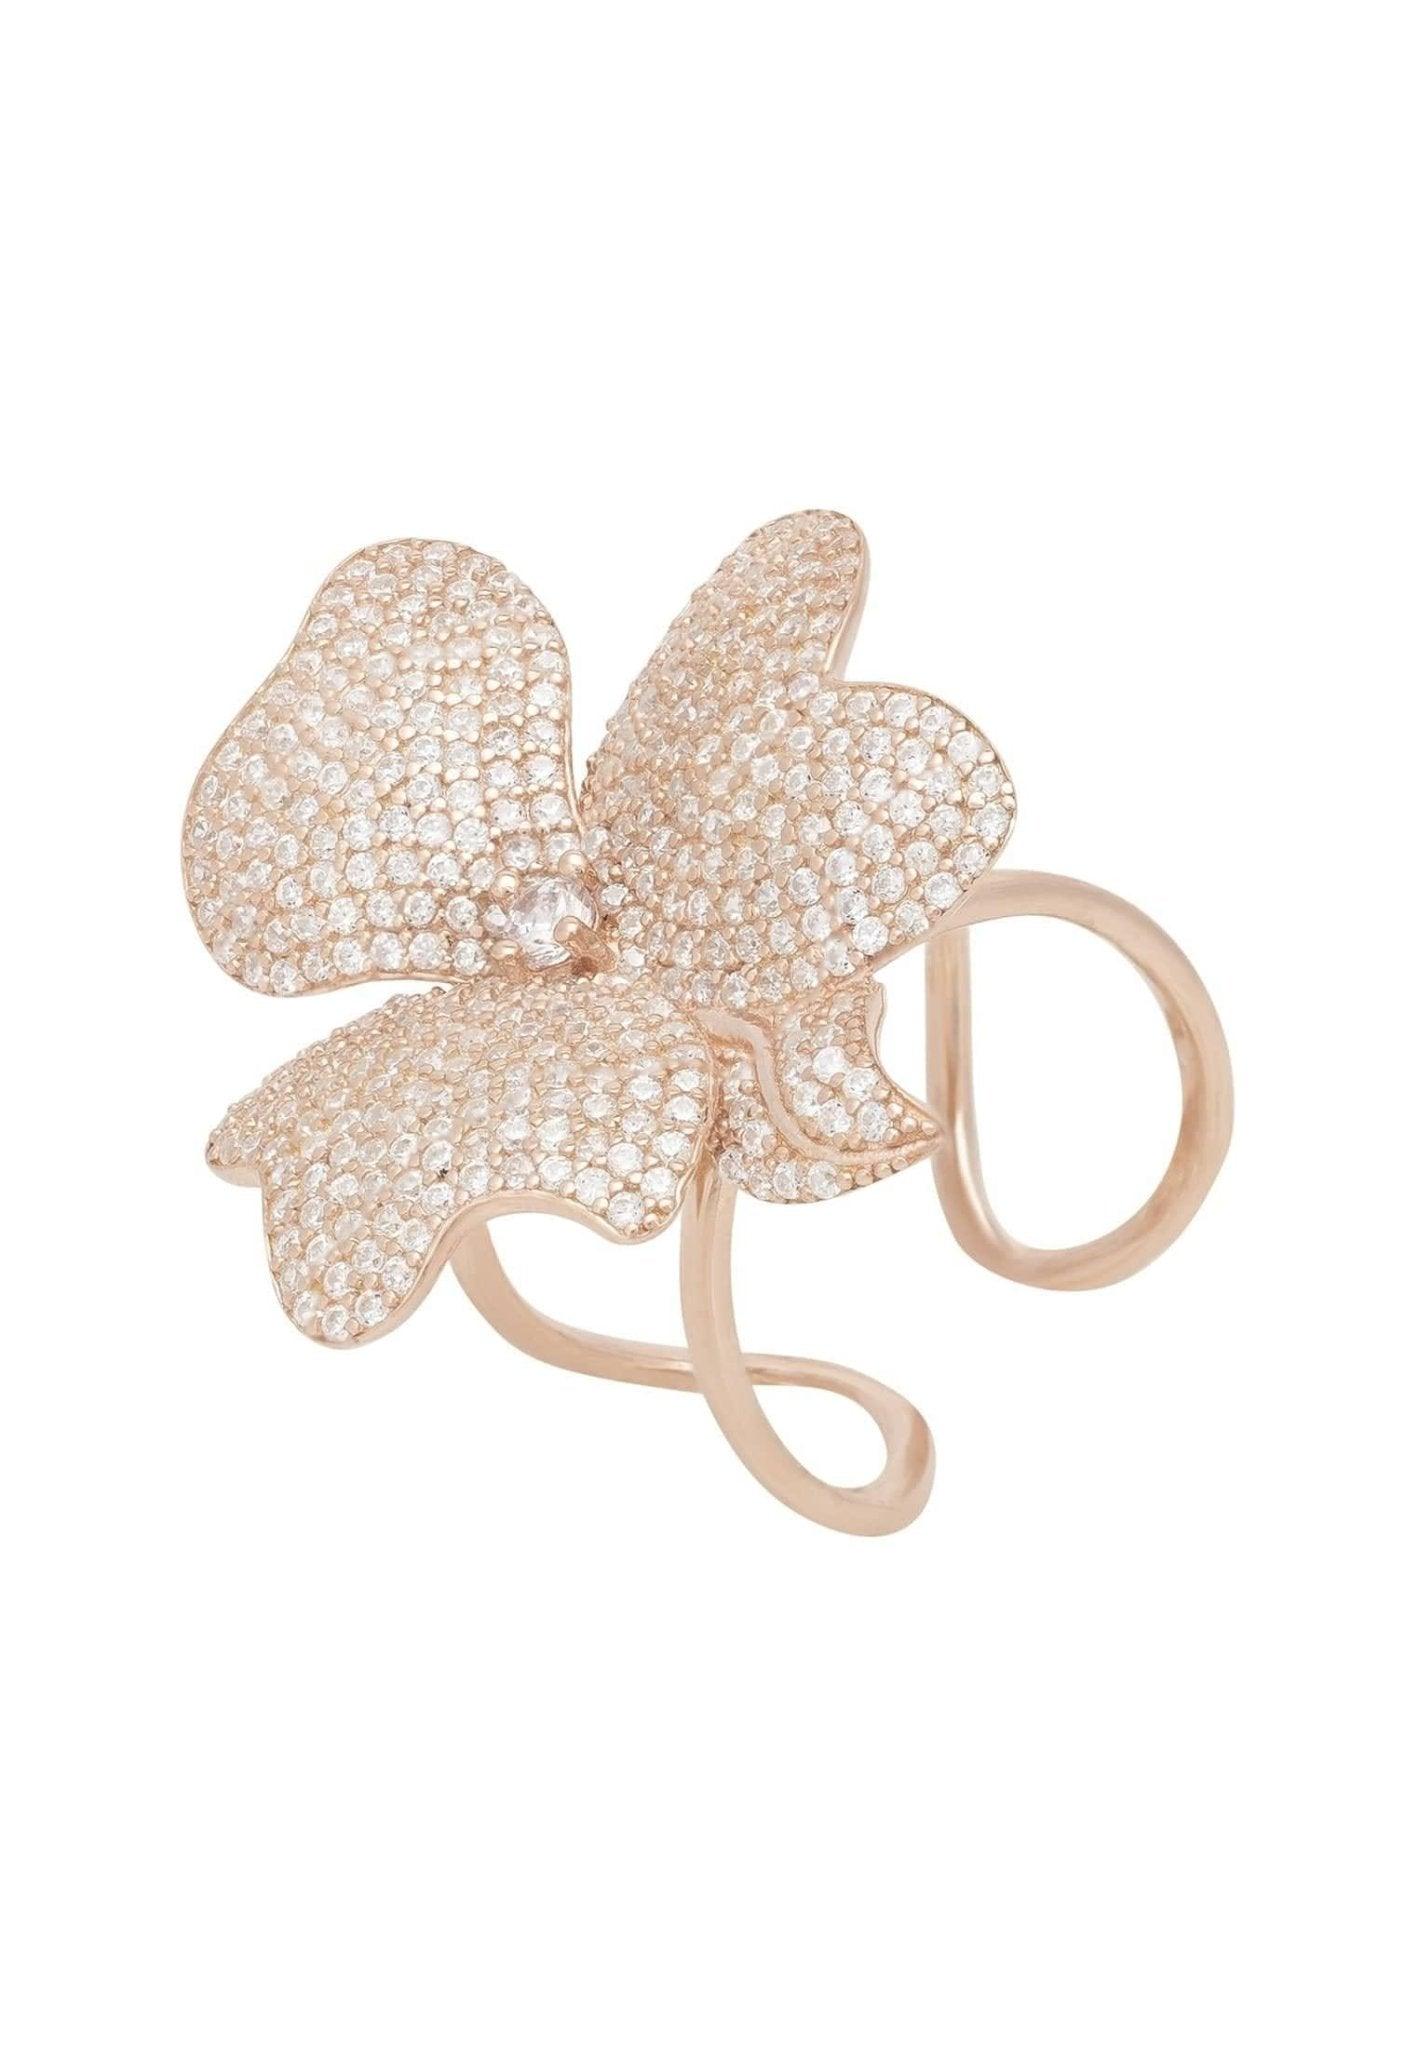 Flower Cocktail Ring Rose Gold Plated